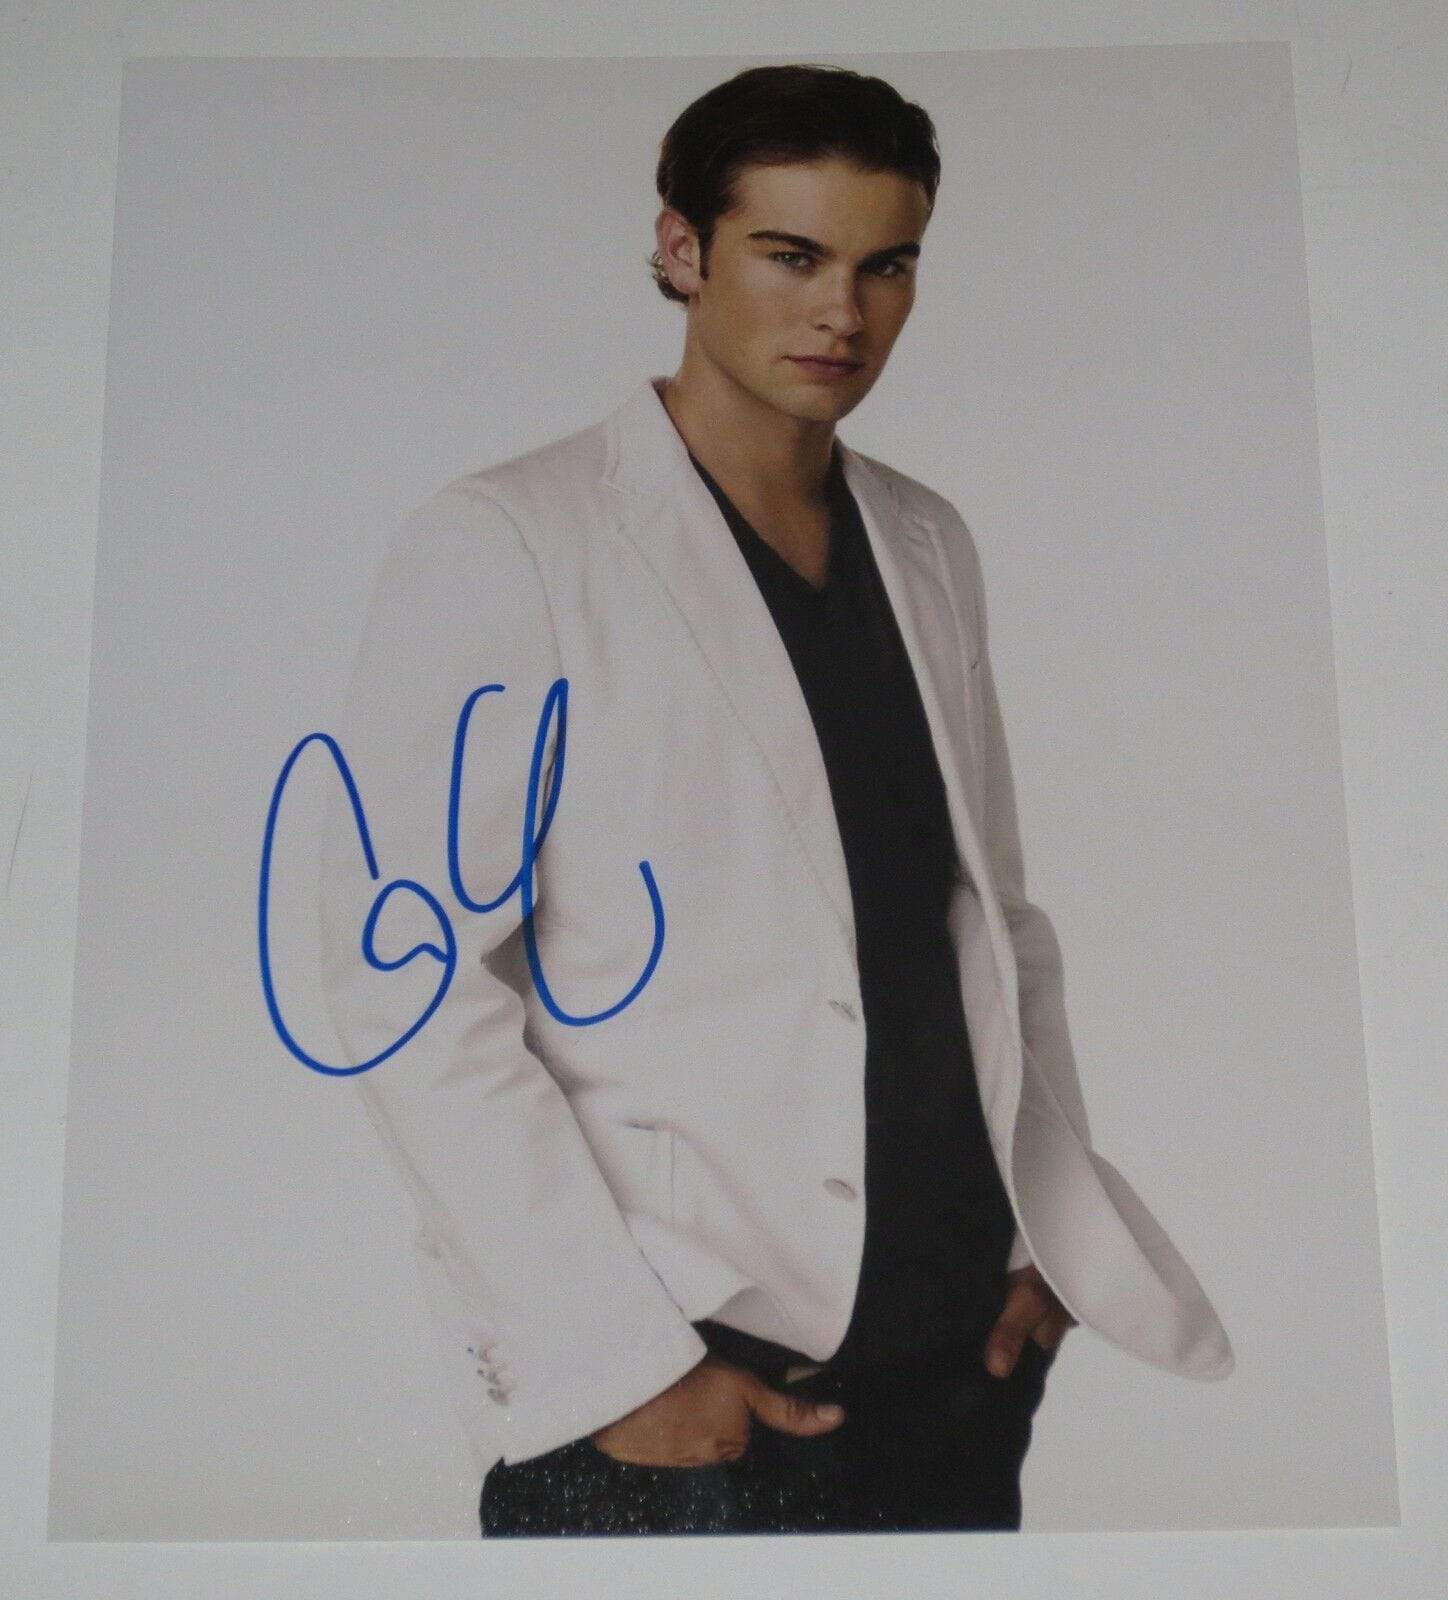 Chace Crawford Authentic Autographed 8x10 Photo - Prime Time Signatures - TV & Film